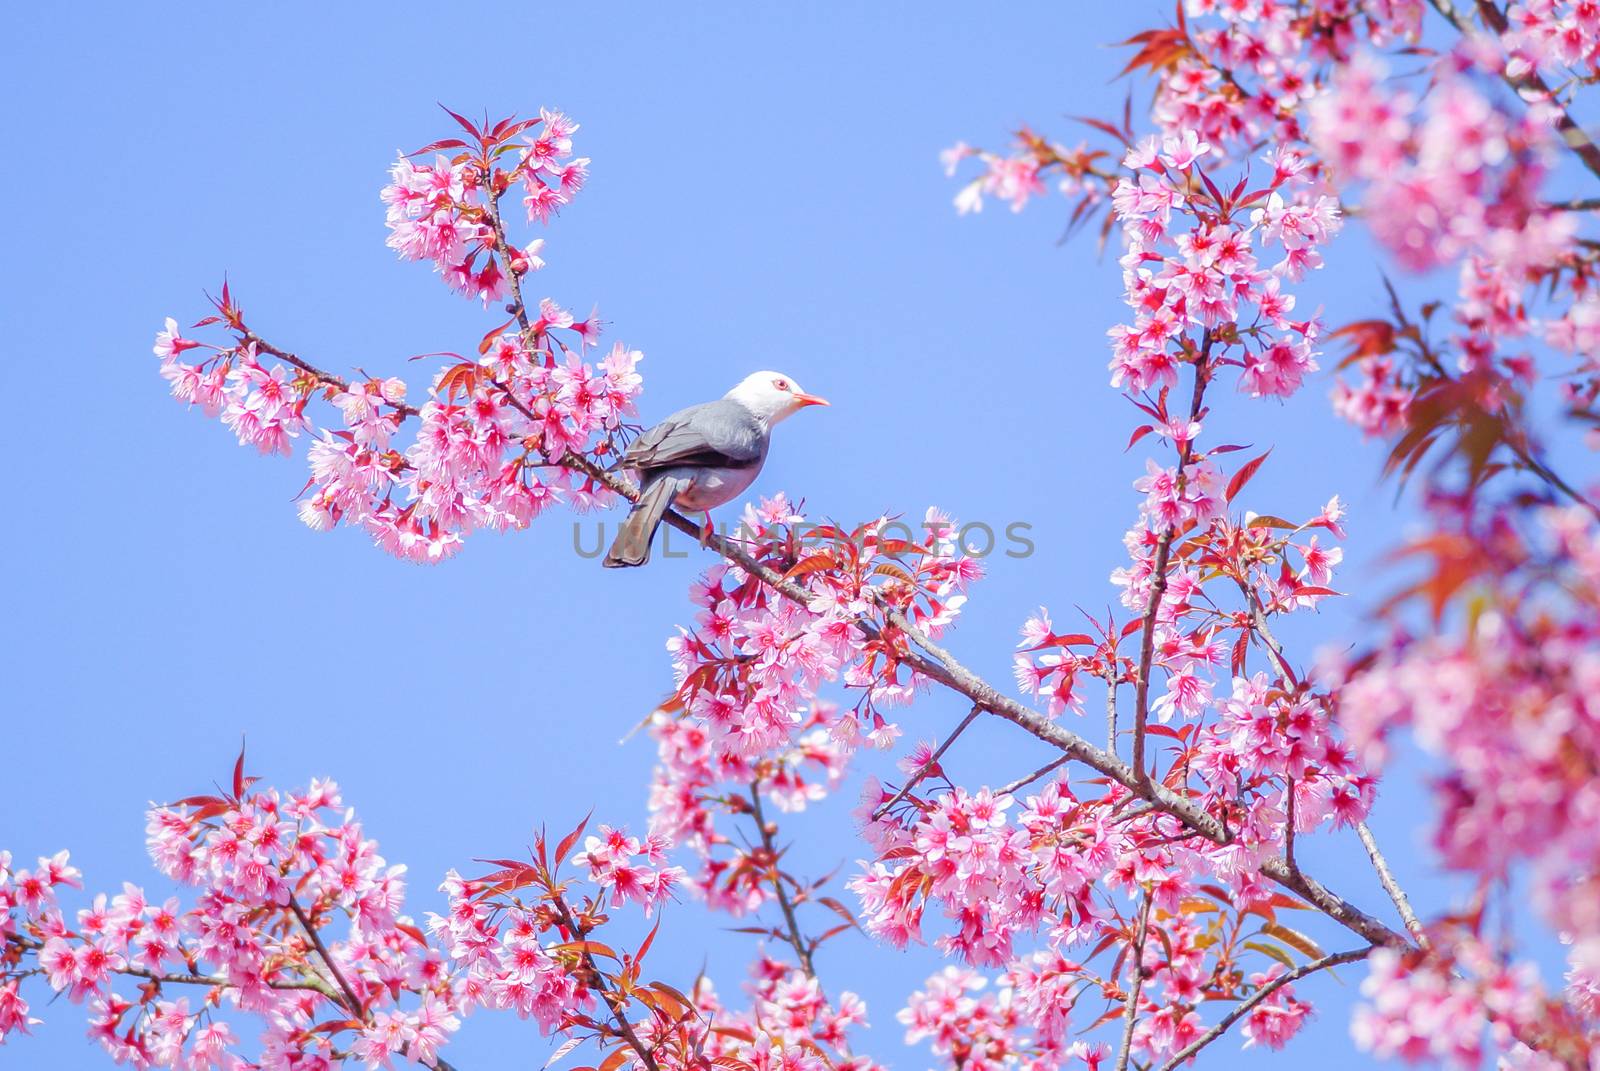 Pink Cherry Blosssom with white-headed bulbul bird by yuiyuize